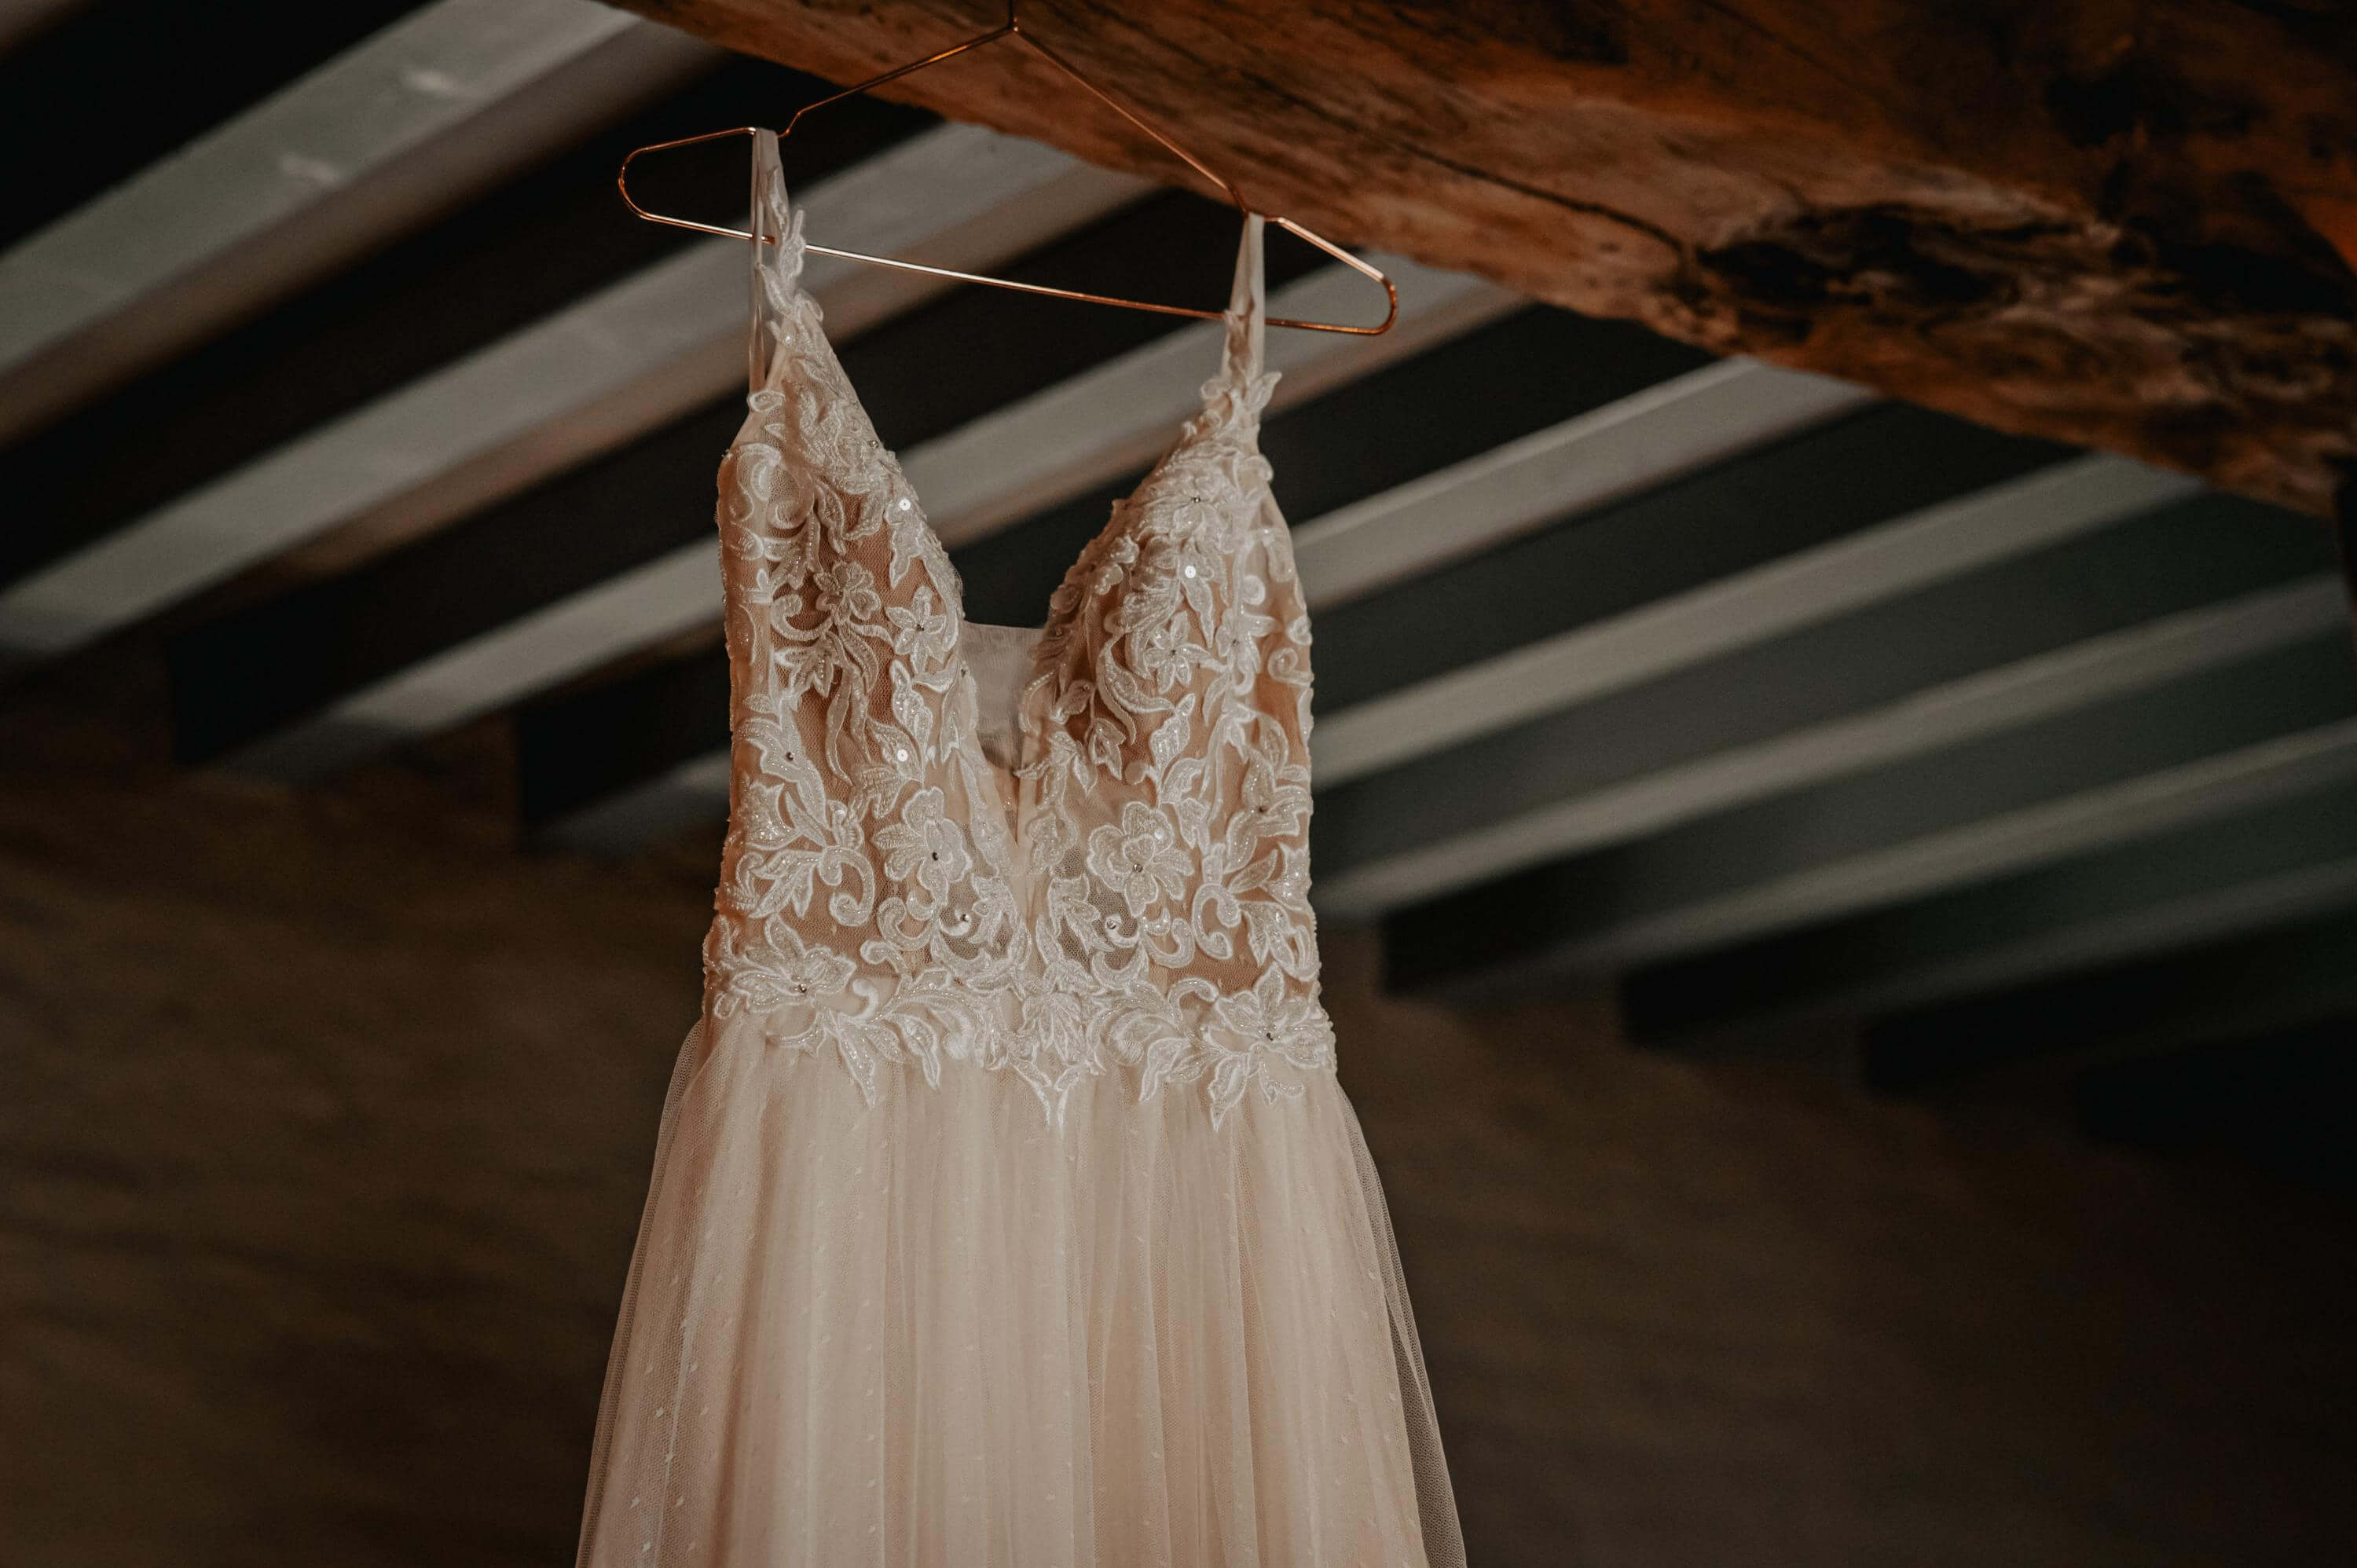 A light, slightly glittering wedding dress with coarse floral lace and narrow straps hangs on a copper-colored hanger from the ceiling beam of a hotel room.